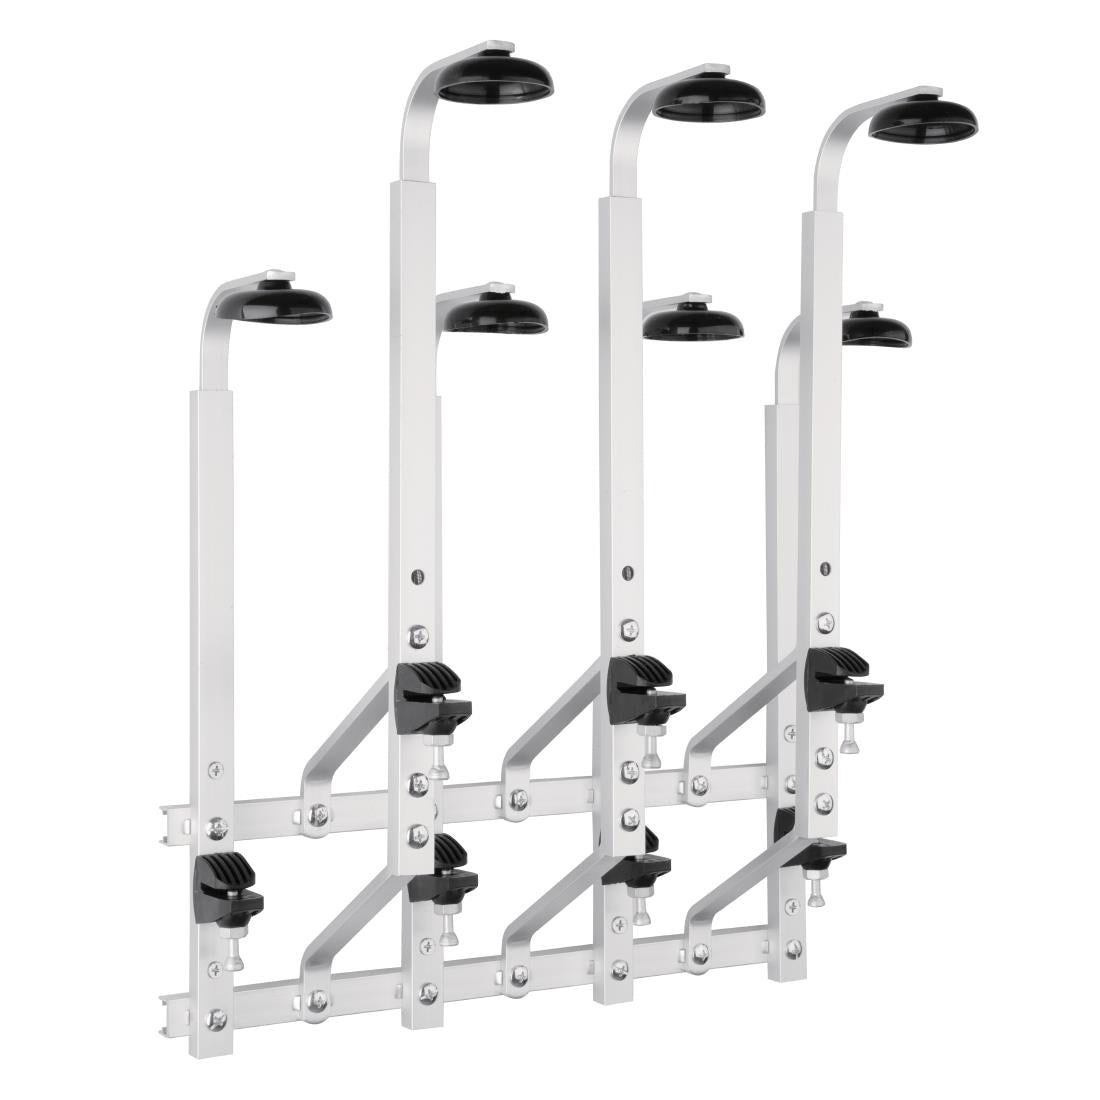 GH051 Olympia 7 Bottle Bar Optic Holder Wall Mount JD Catering Equipment Solutions Ltd